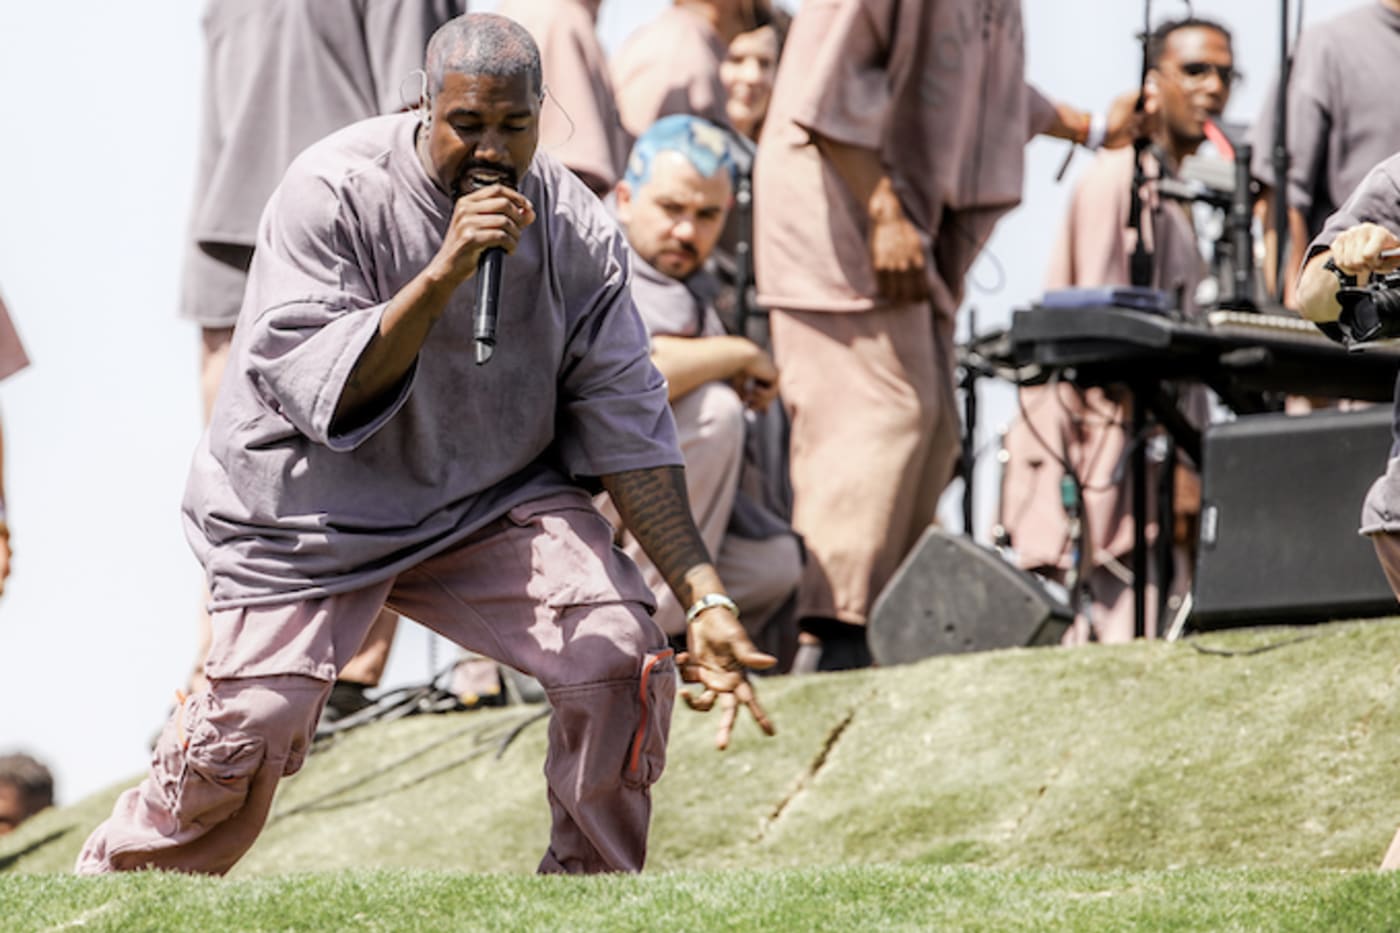 Kanye West performs Sunday Service during the 2019 Coachella Valley Music And Arts Festival.